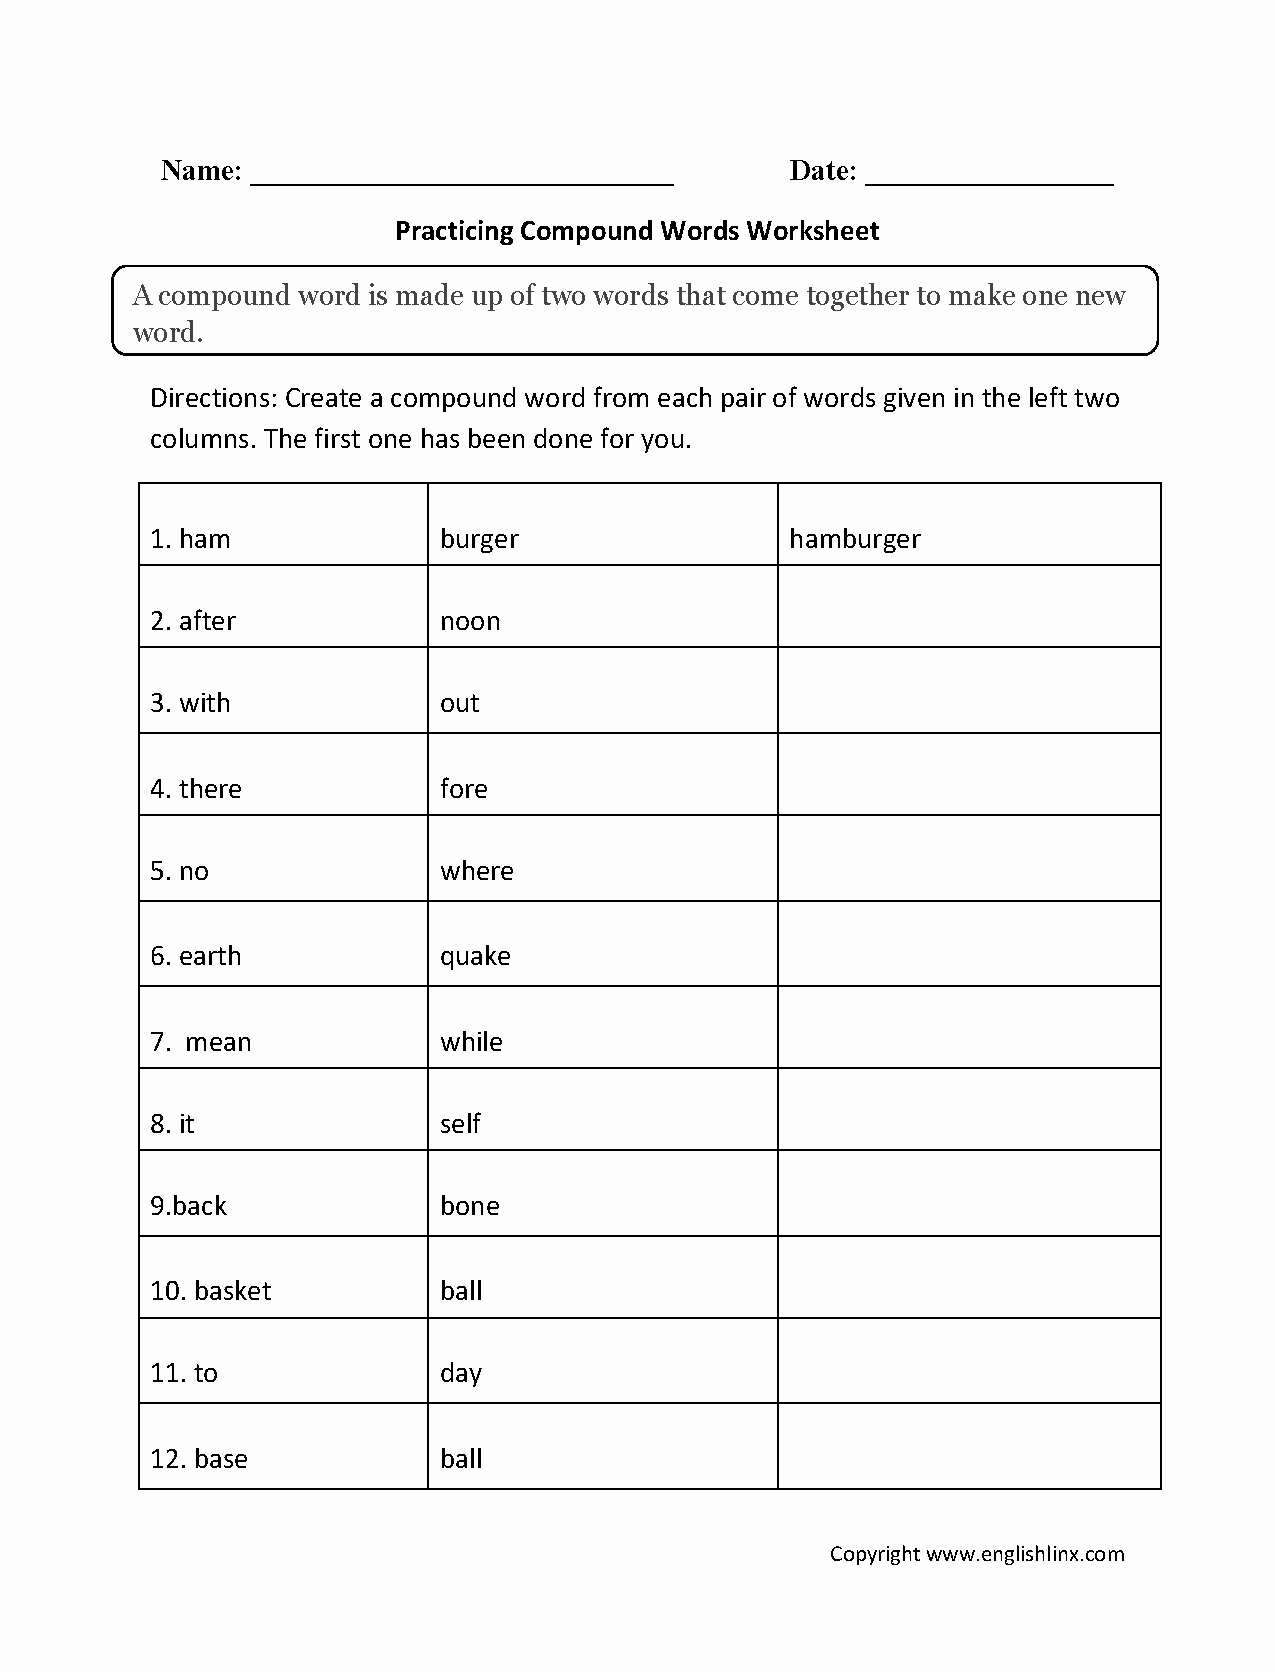 Free Printable Compound Word Worksheets Awesome Practicing Pound Words Worksheets with Images